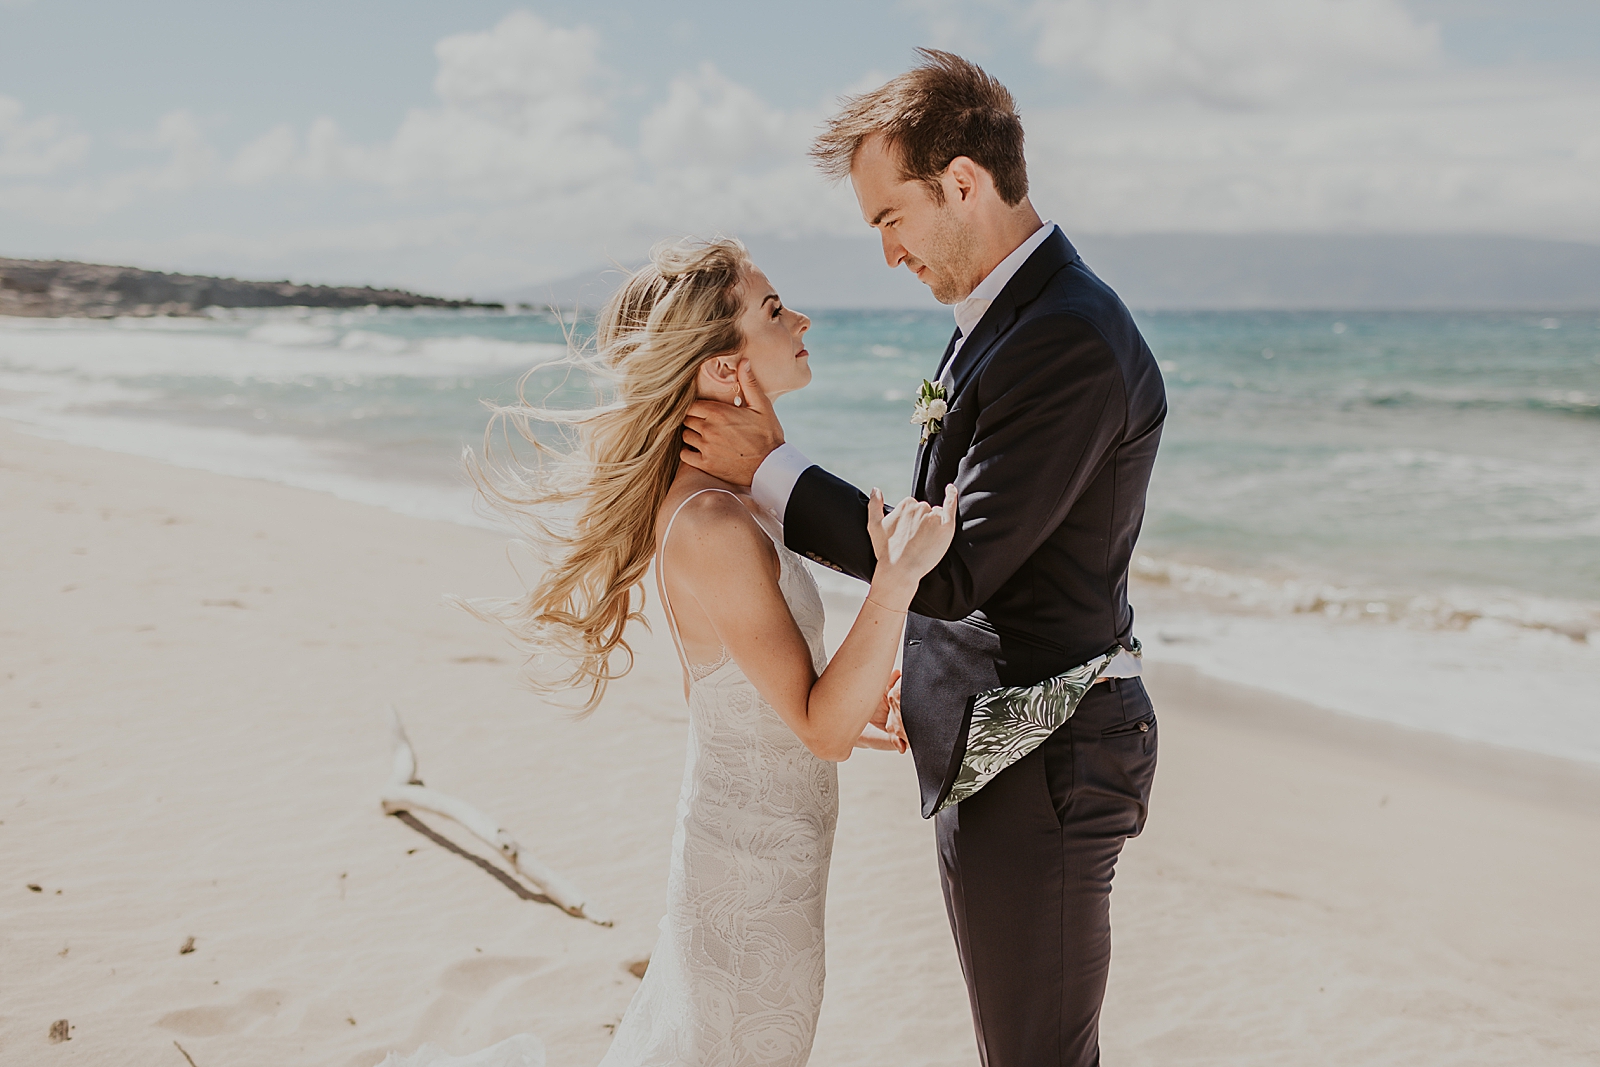 Bride and Groom holding each other and looking at each other on the beach in front of the ocean water